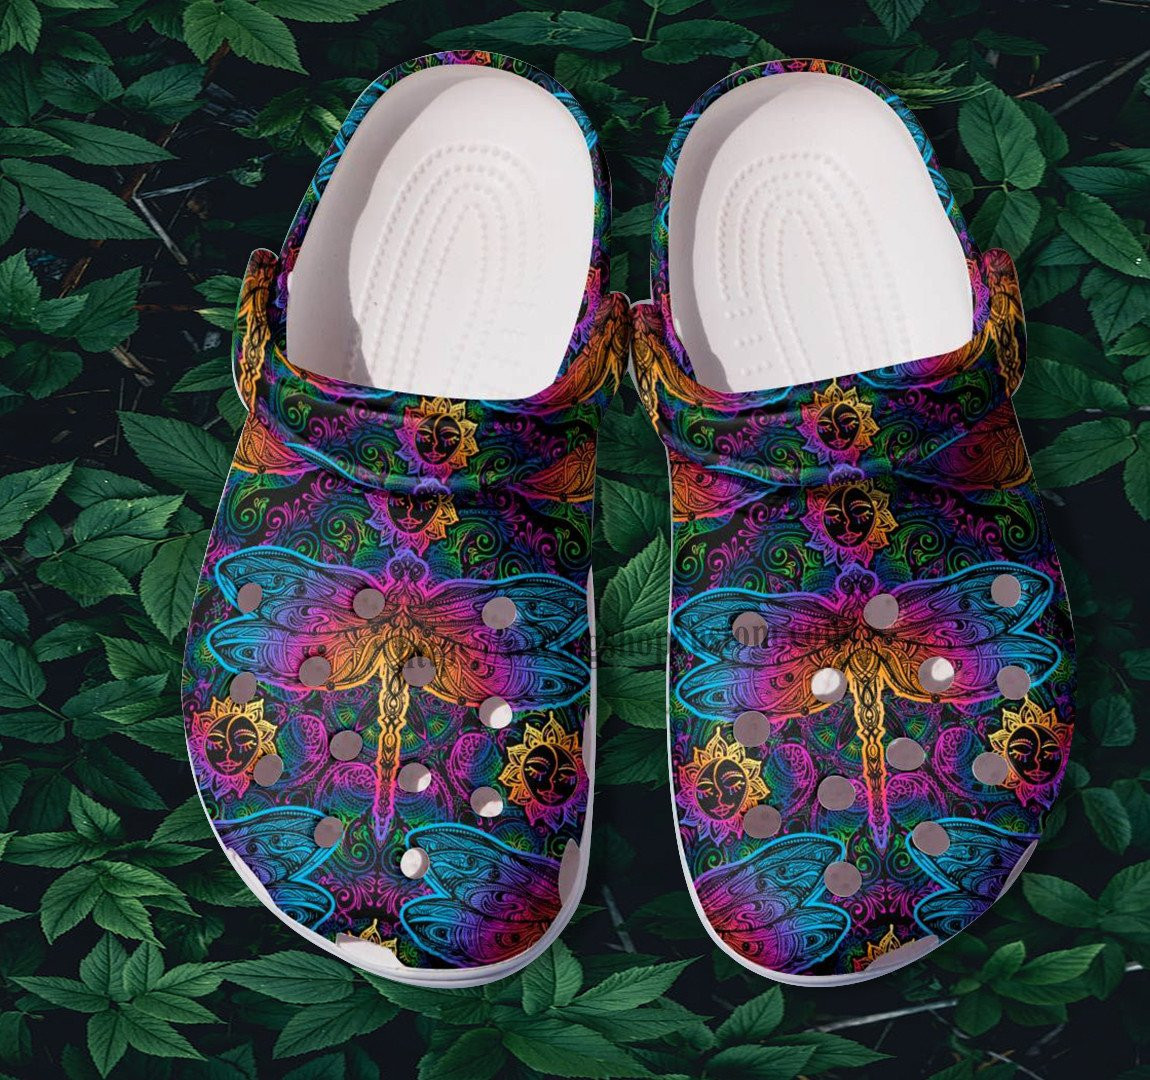 Gift Step Daughter Crocs Shoes Dragonfly Hippie Boho – Dragonfly Rainbow Vintage Clogs Gift Women Birthday Day